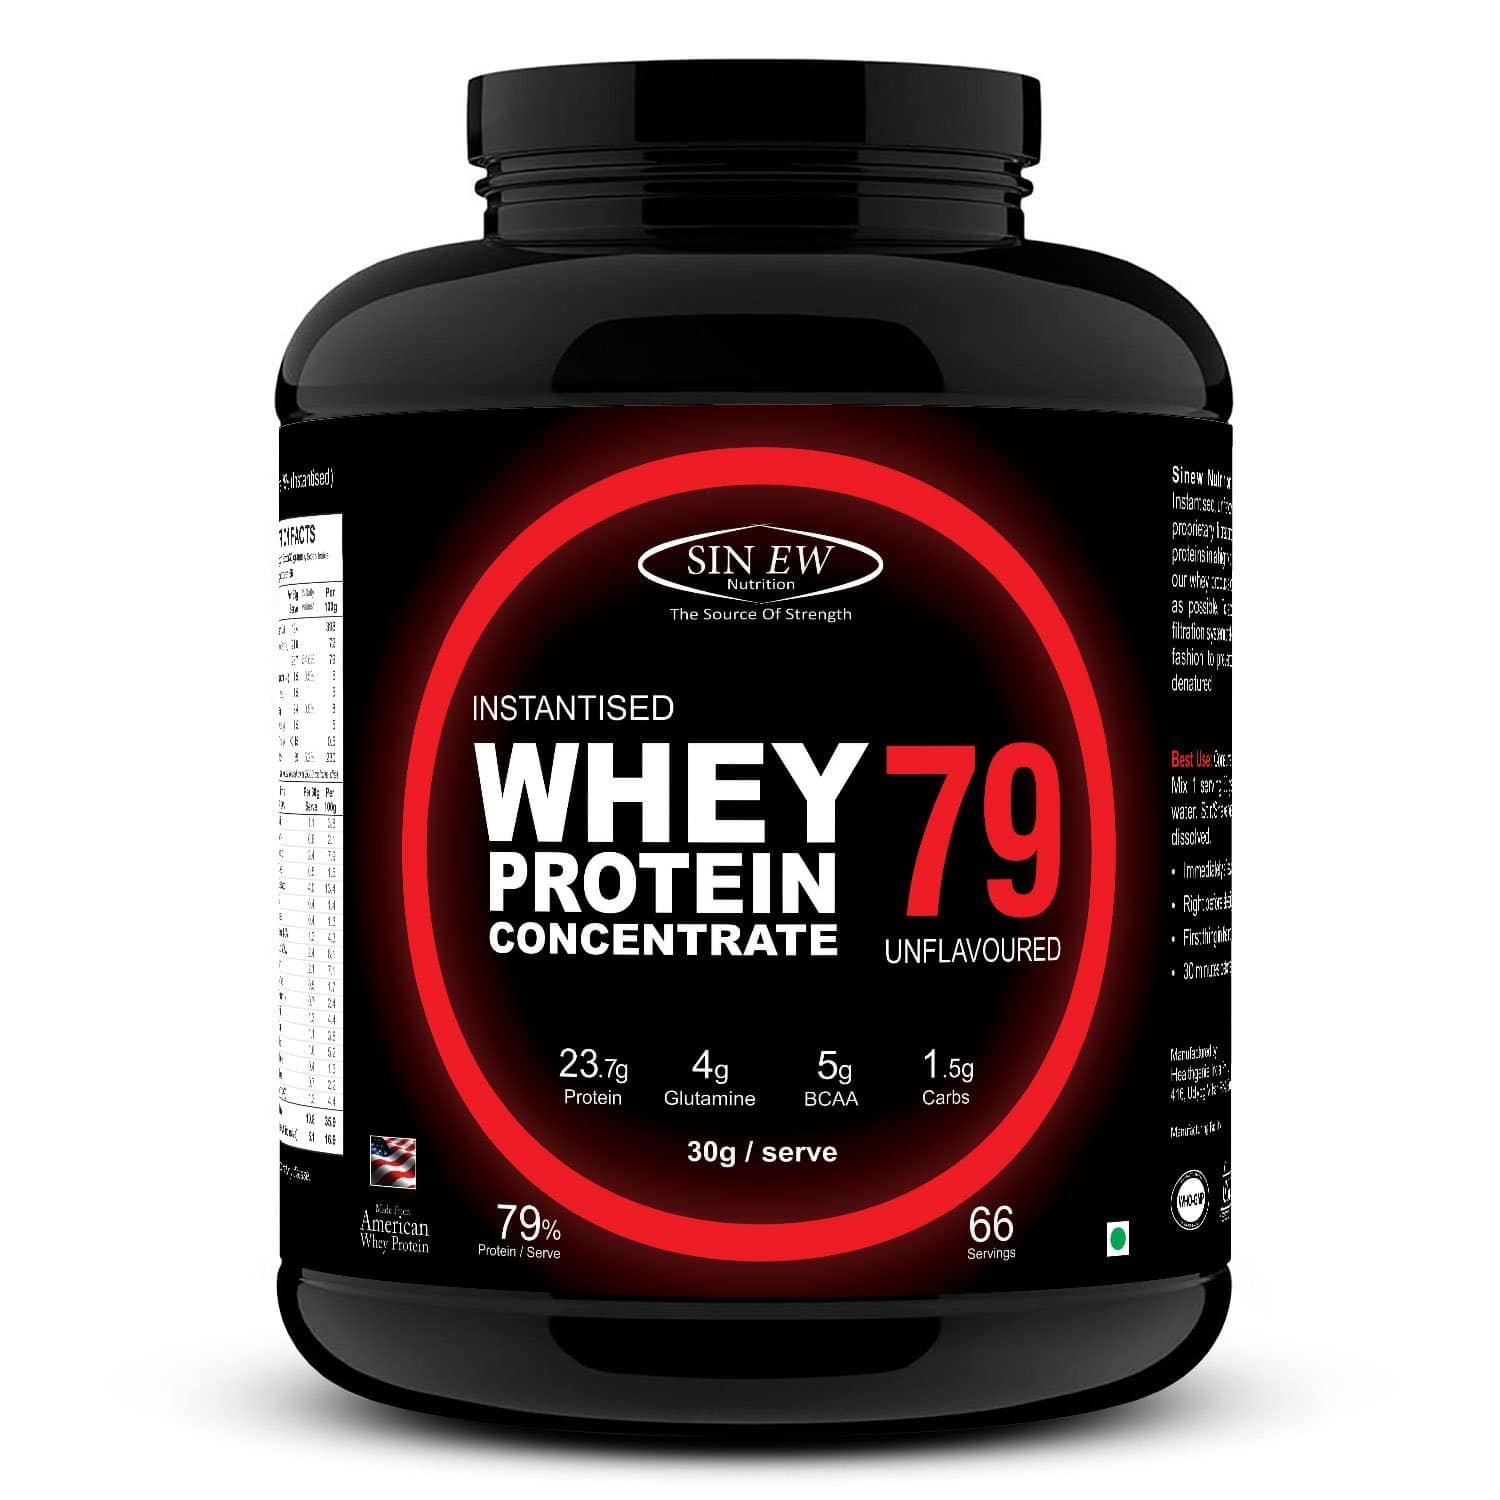 Sinew Nutrition Instantised Whey Protein Concentrate 79% review